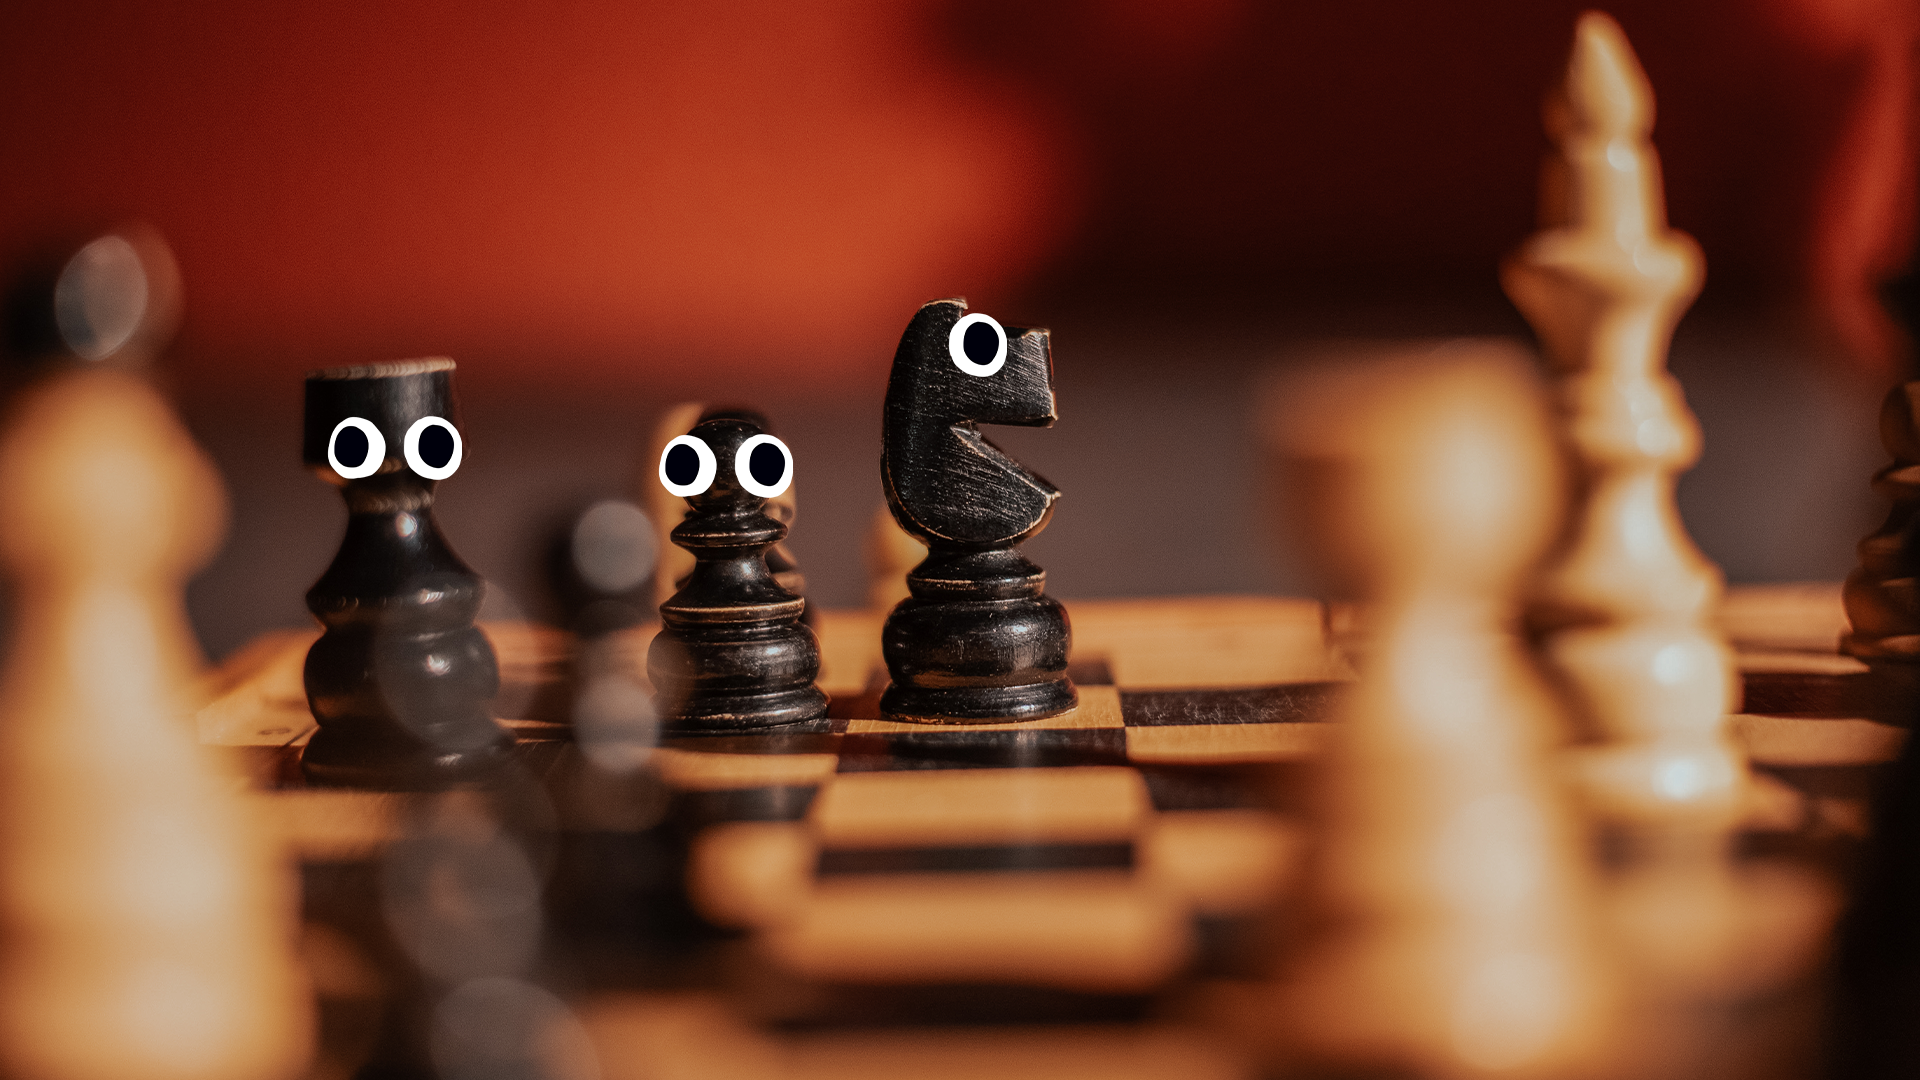 Chess pieces with eyes